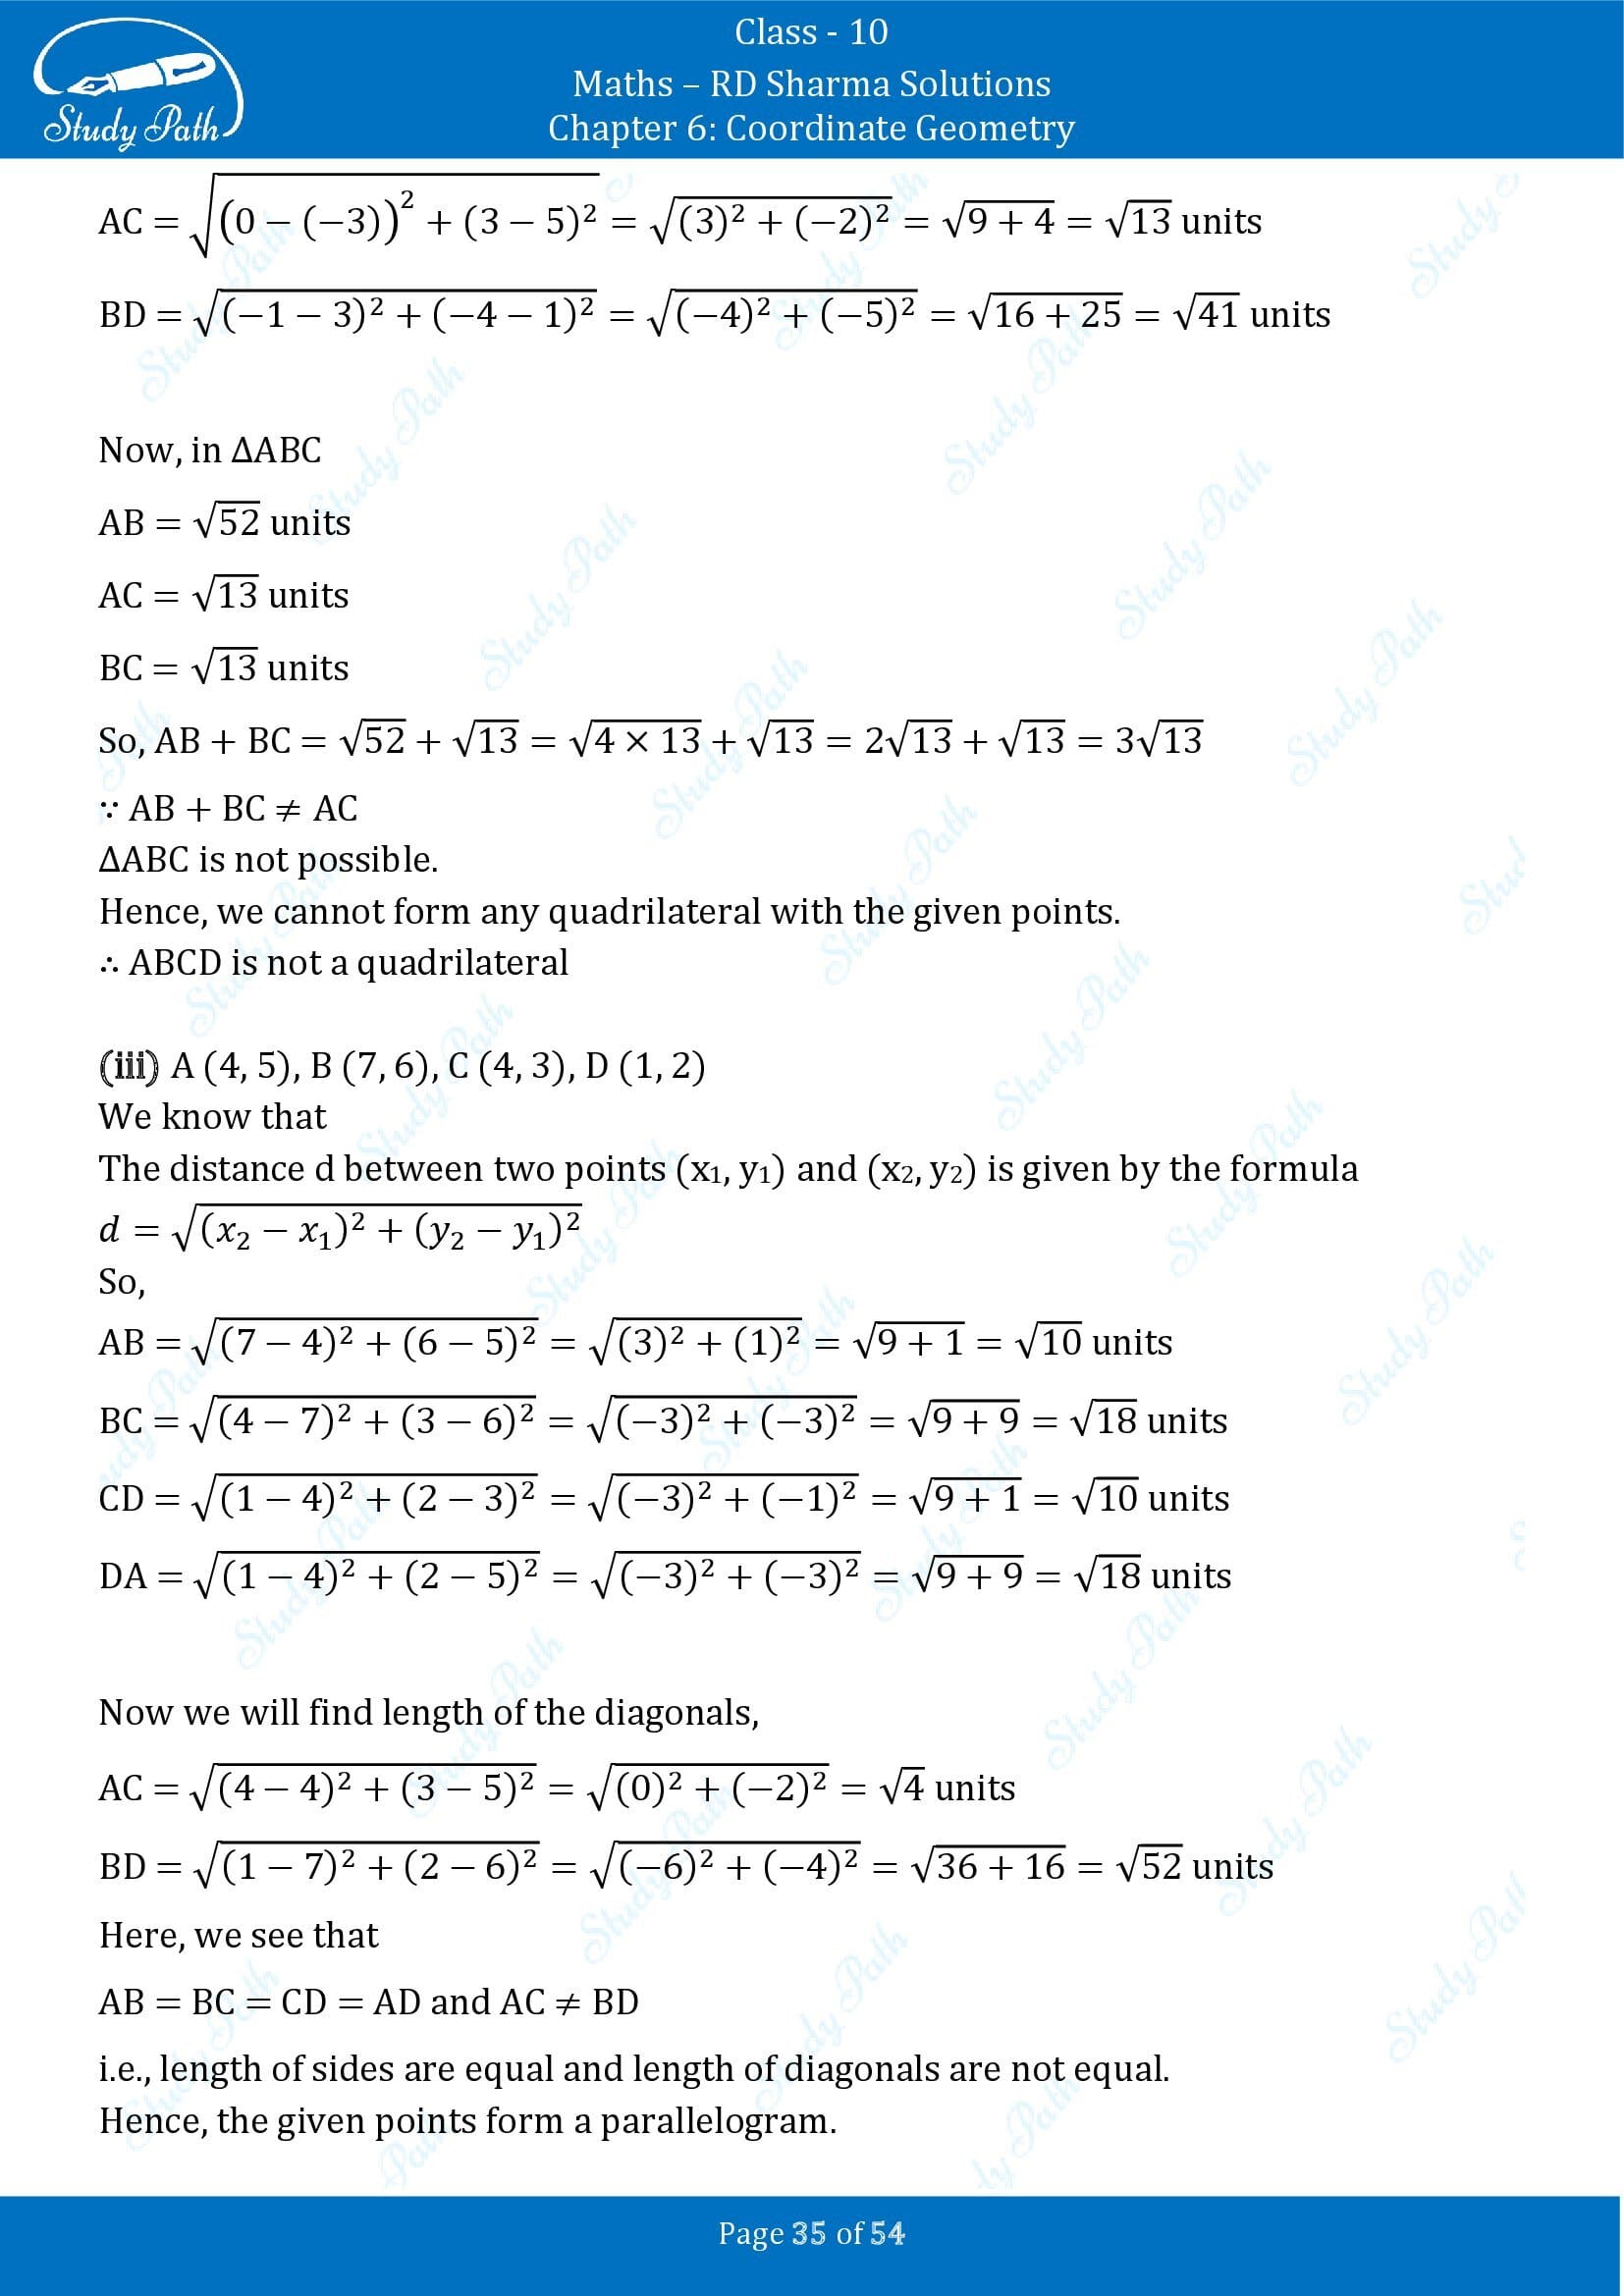 RD Sharma Solutions Class 10 Chapter 6 Coordinate Geometry Exercise 6.2 0035